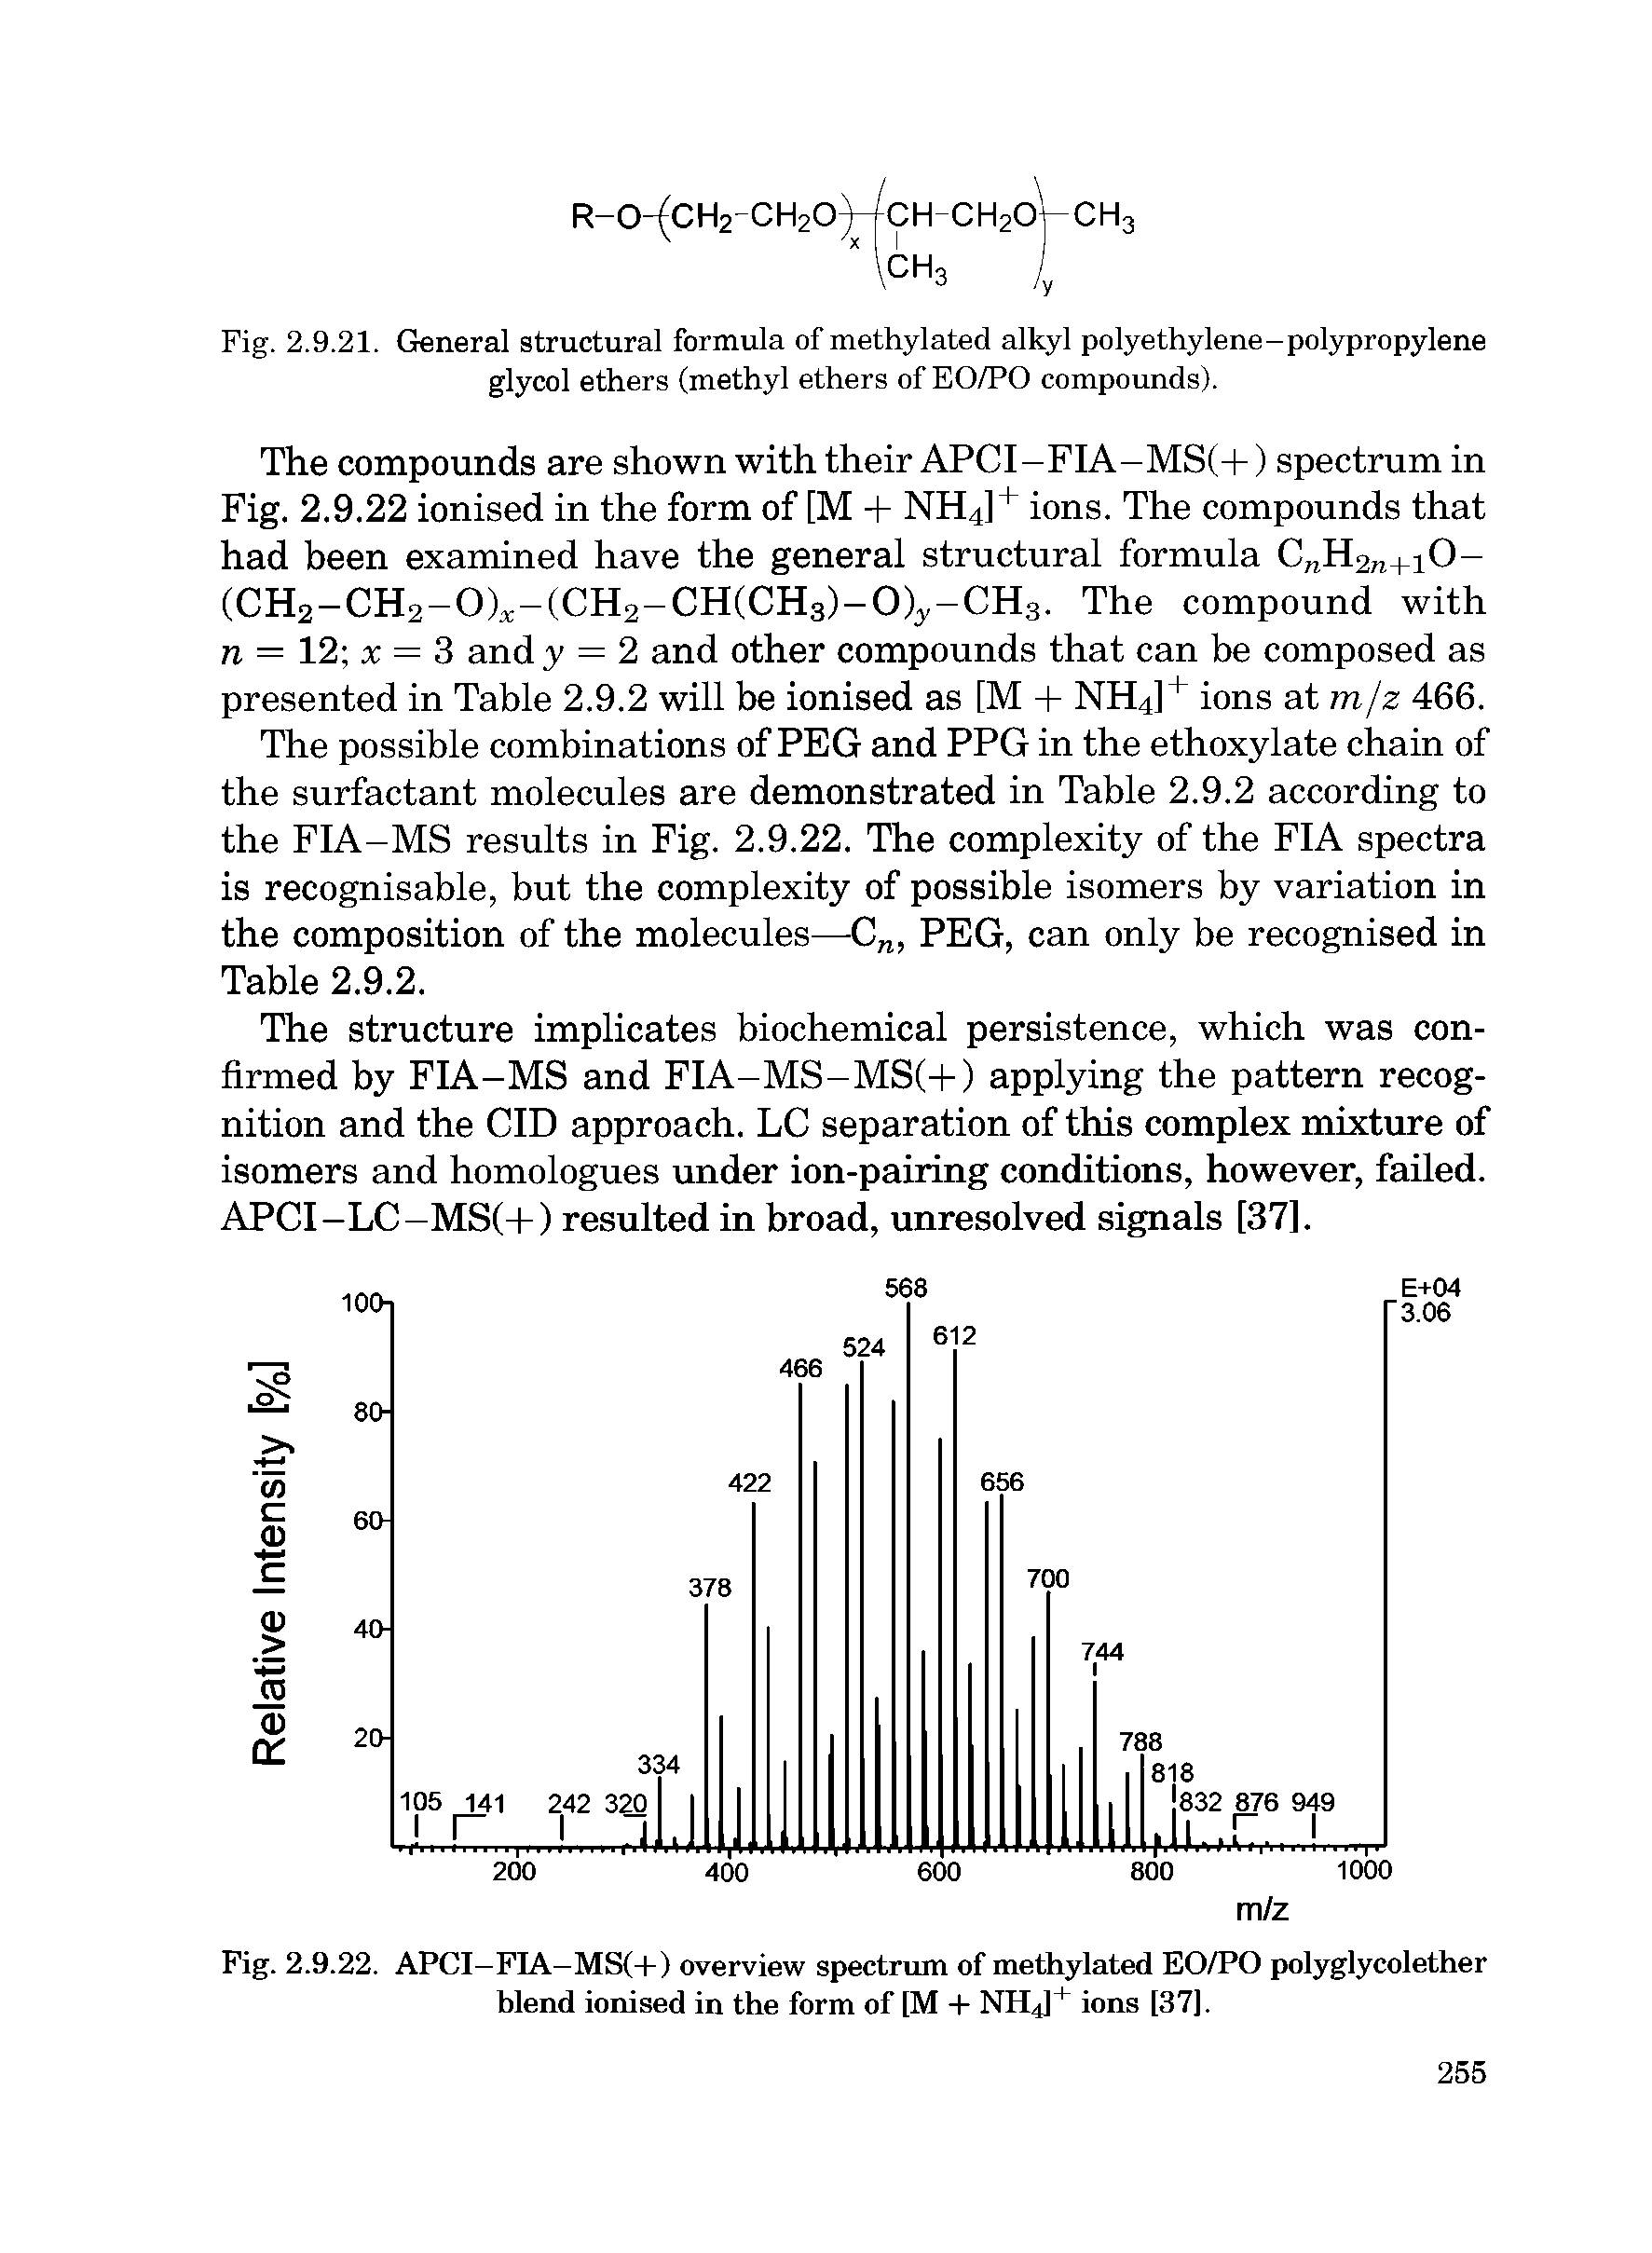 Fig. 2.9.22. APCI—FIA—MS(+) overview spectrum of methylated EO/PO polyglycolether blend ionised in the form of [M + NH4P ions [37].